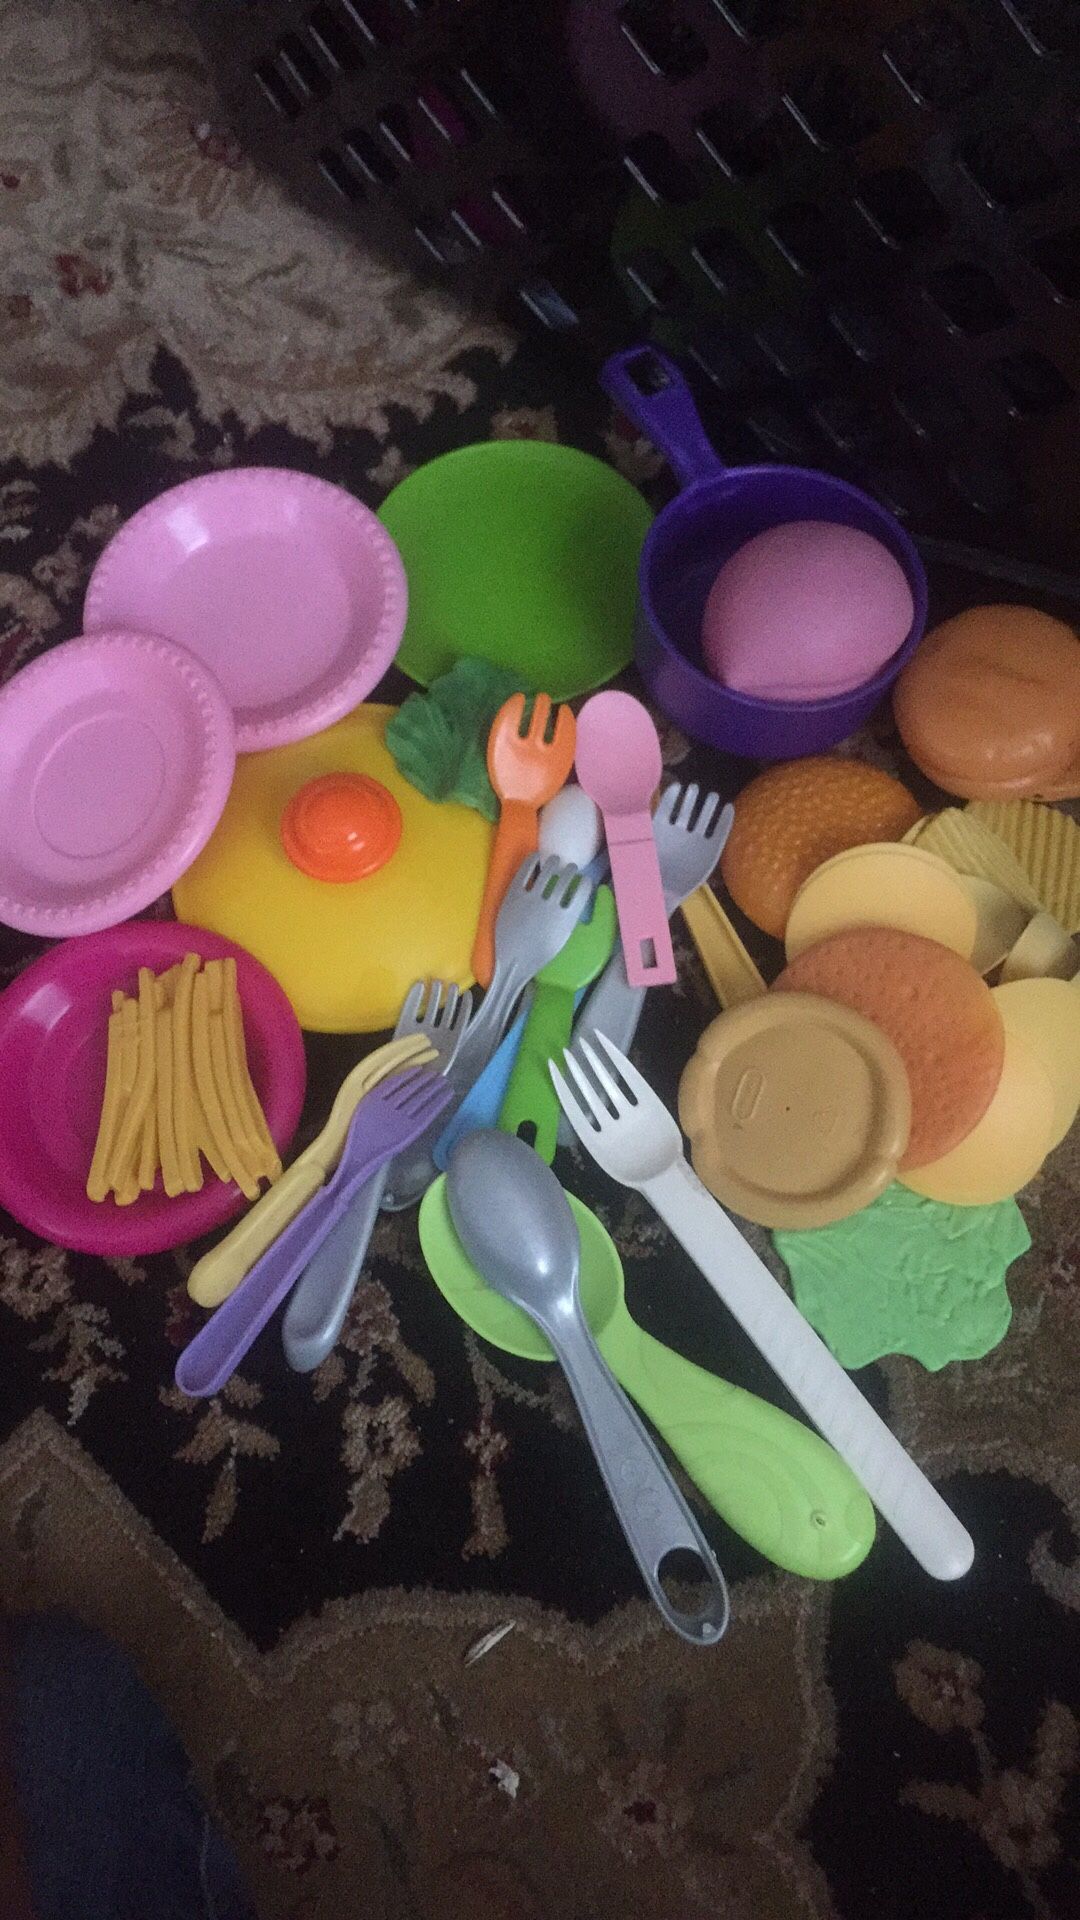 Play food,plates and utensils